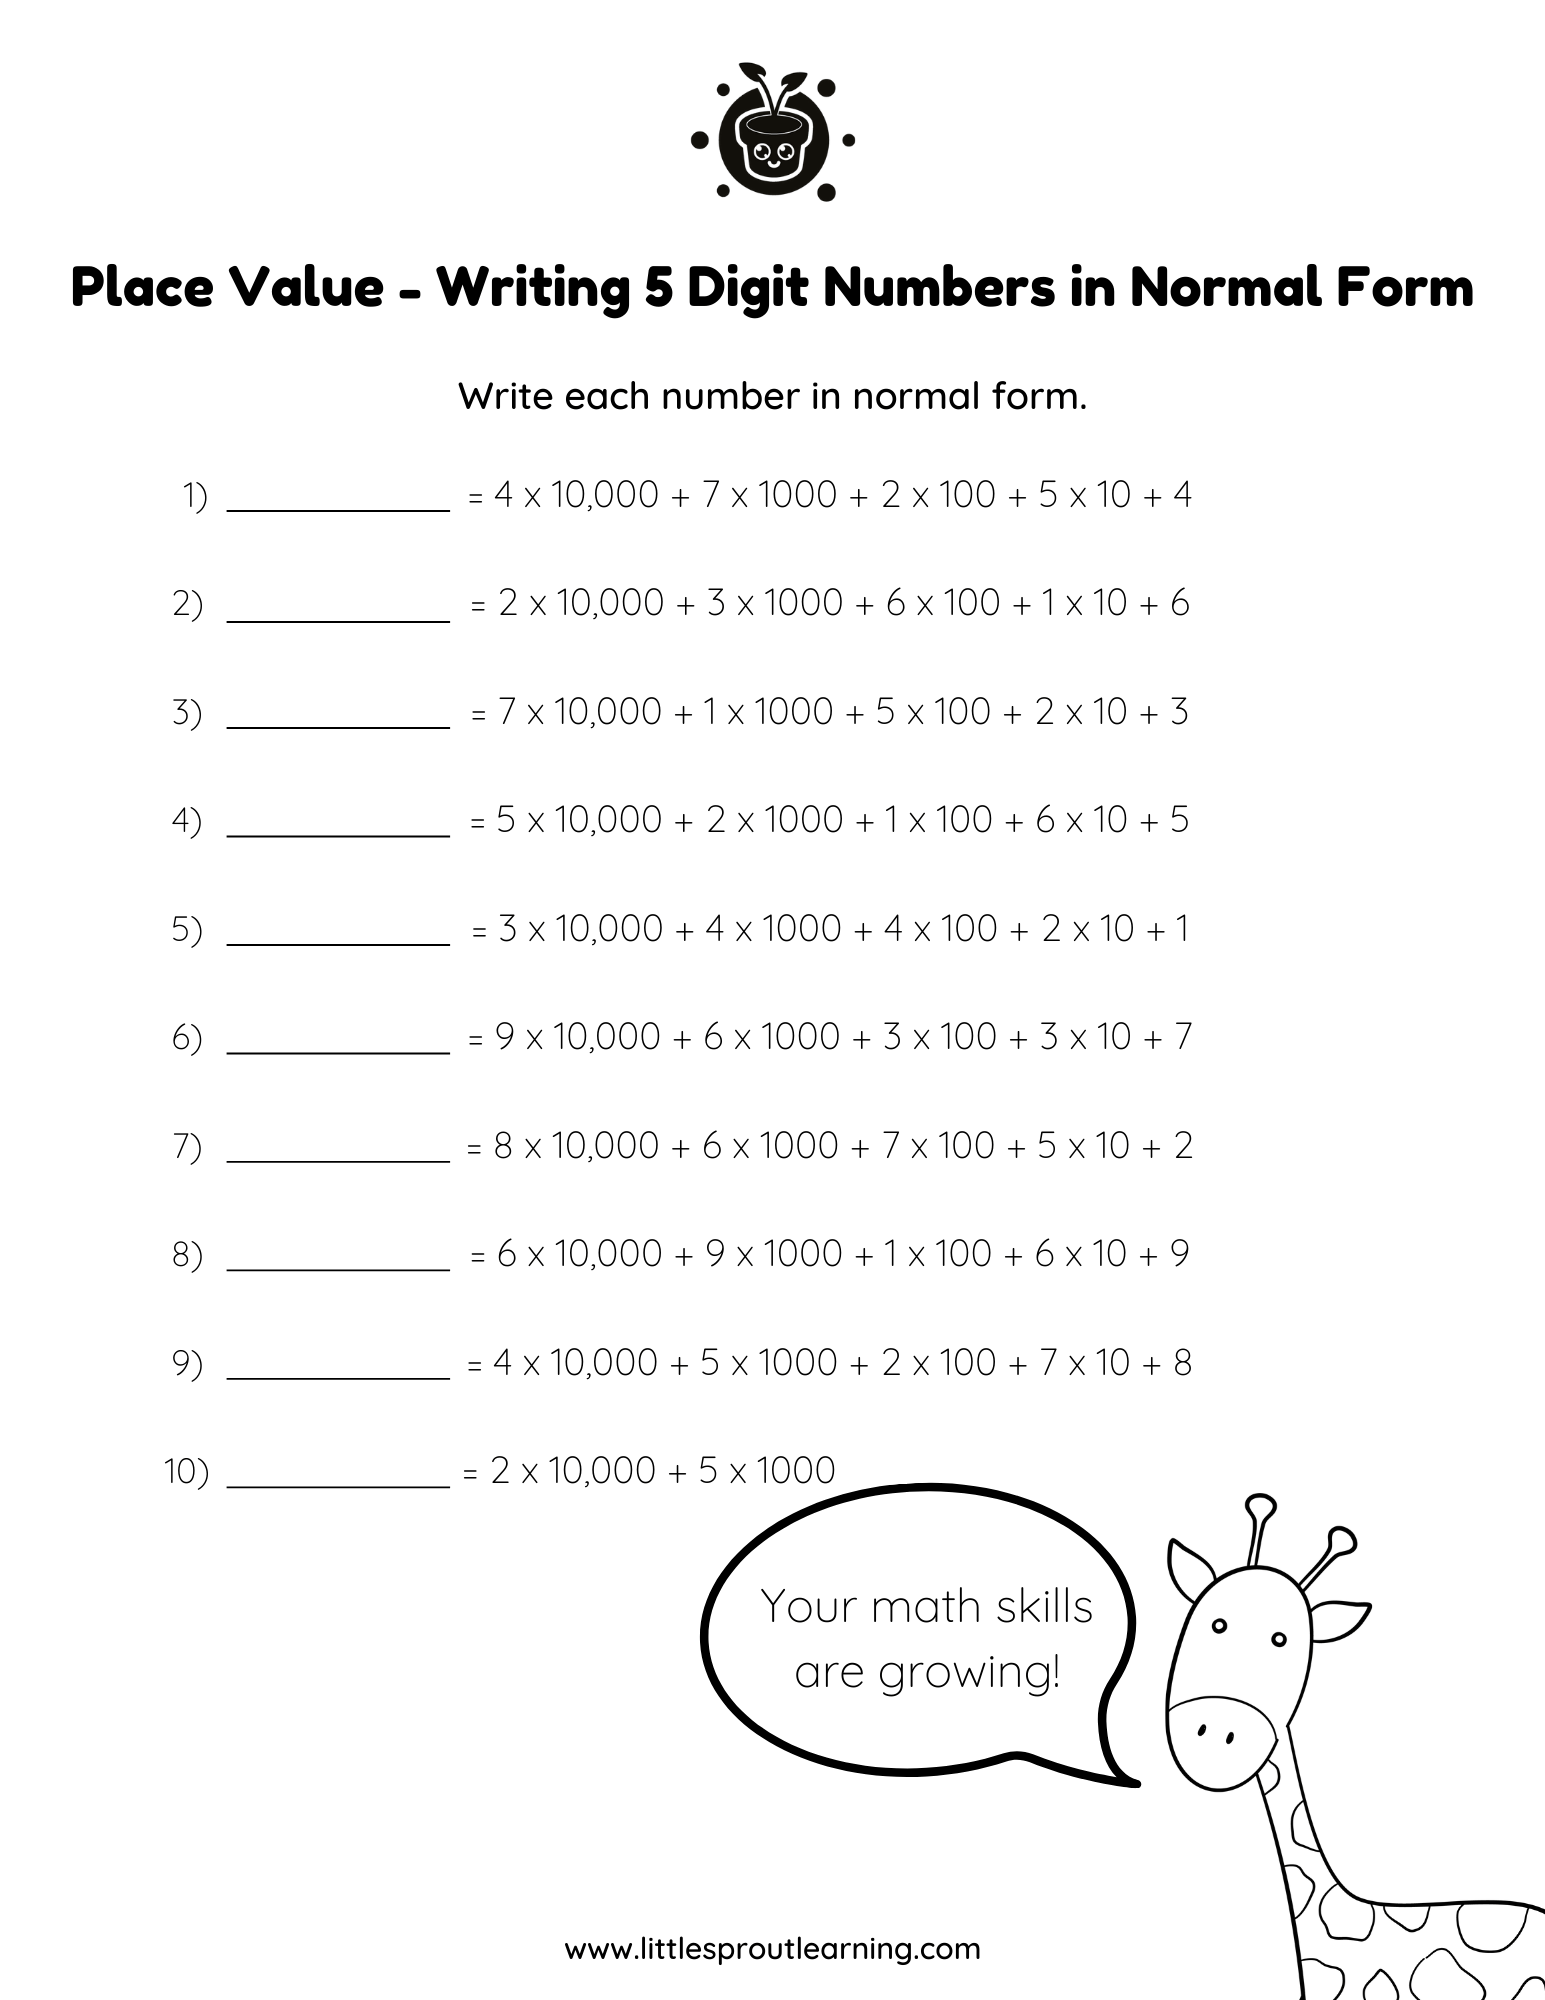 Place Values Worksheet – Write 5 Digit Numbers in Normal Form